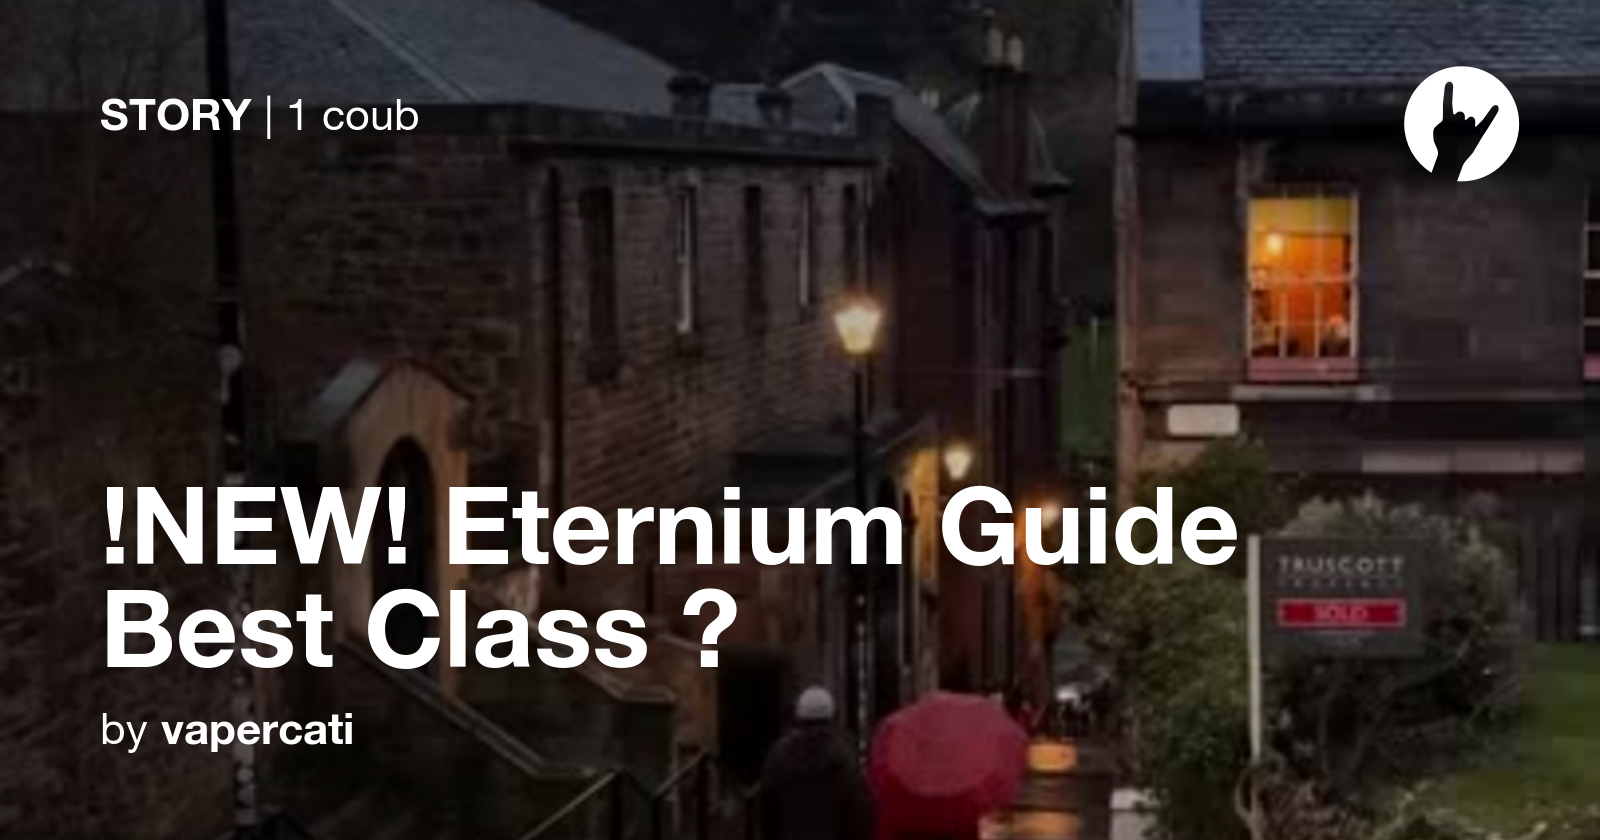 what is the best class led eternium you tube